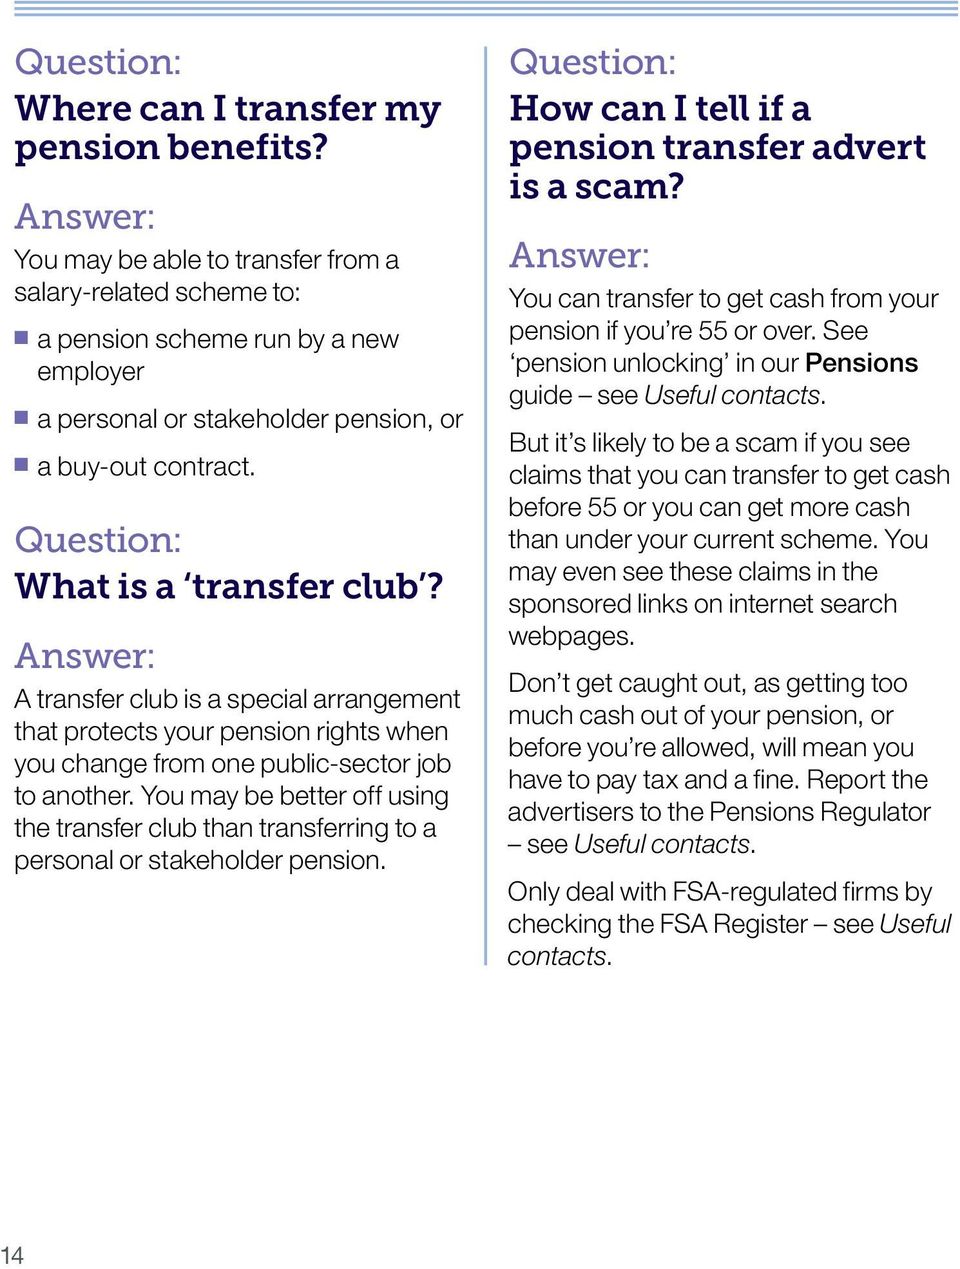 Answer: A transfer club is a special arrangement that protects your pension rights when you change from one public-sector job to another.